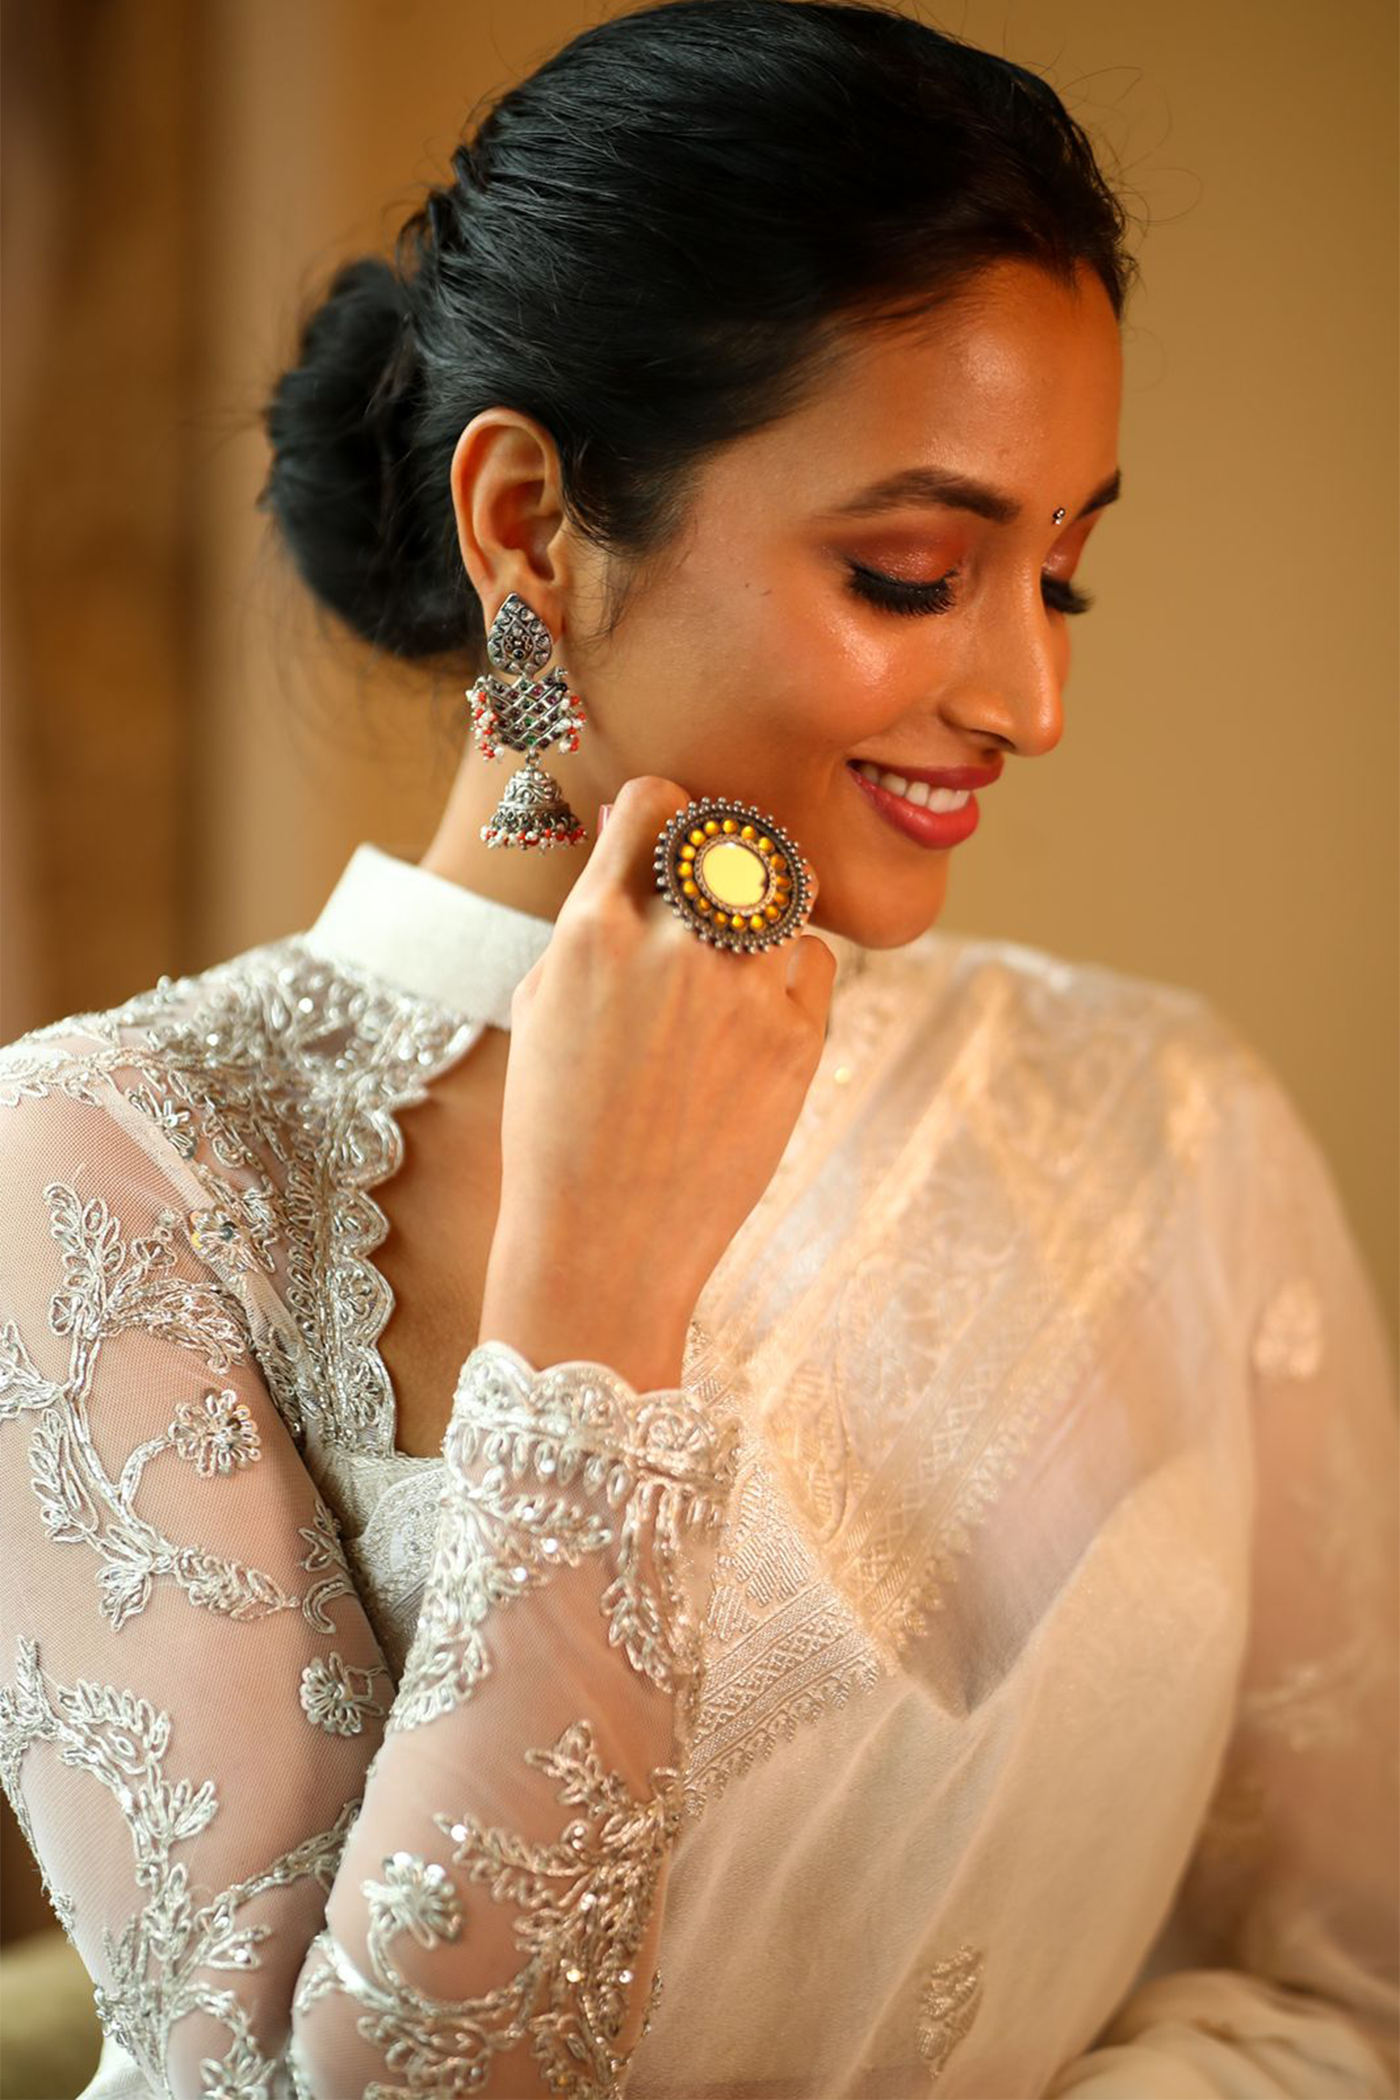 Srinidhi Shetty in White banaras saree paired with embroidered blouse